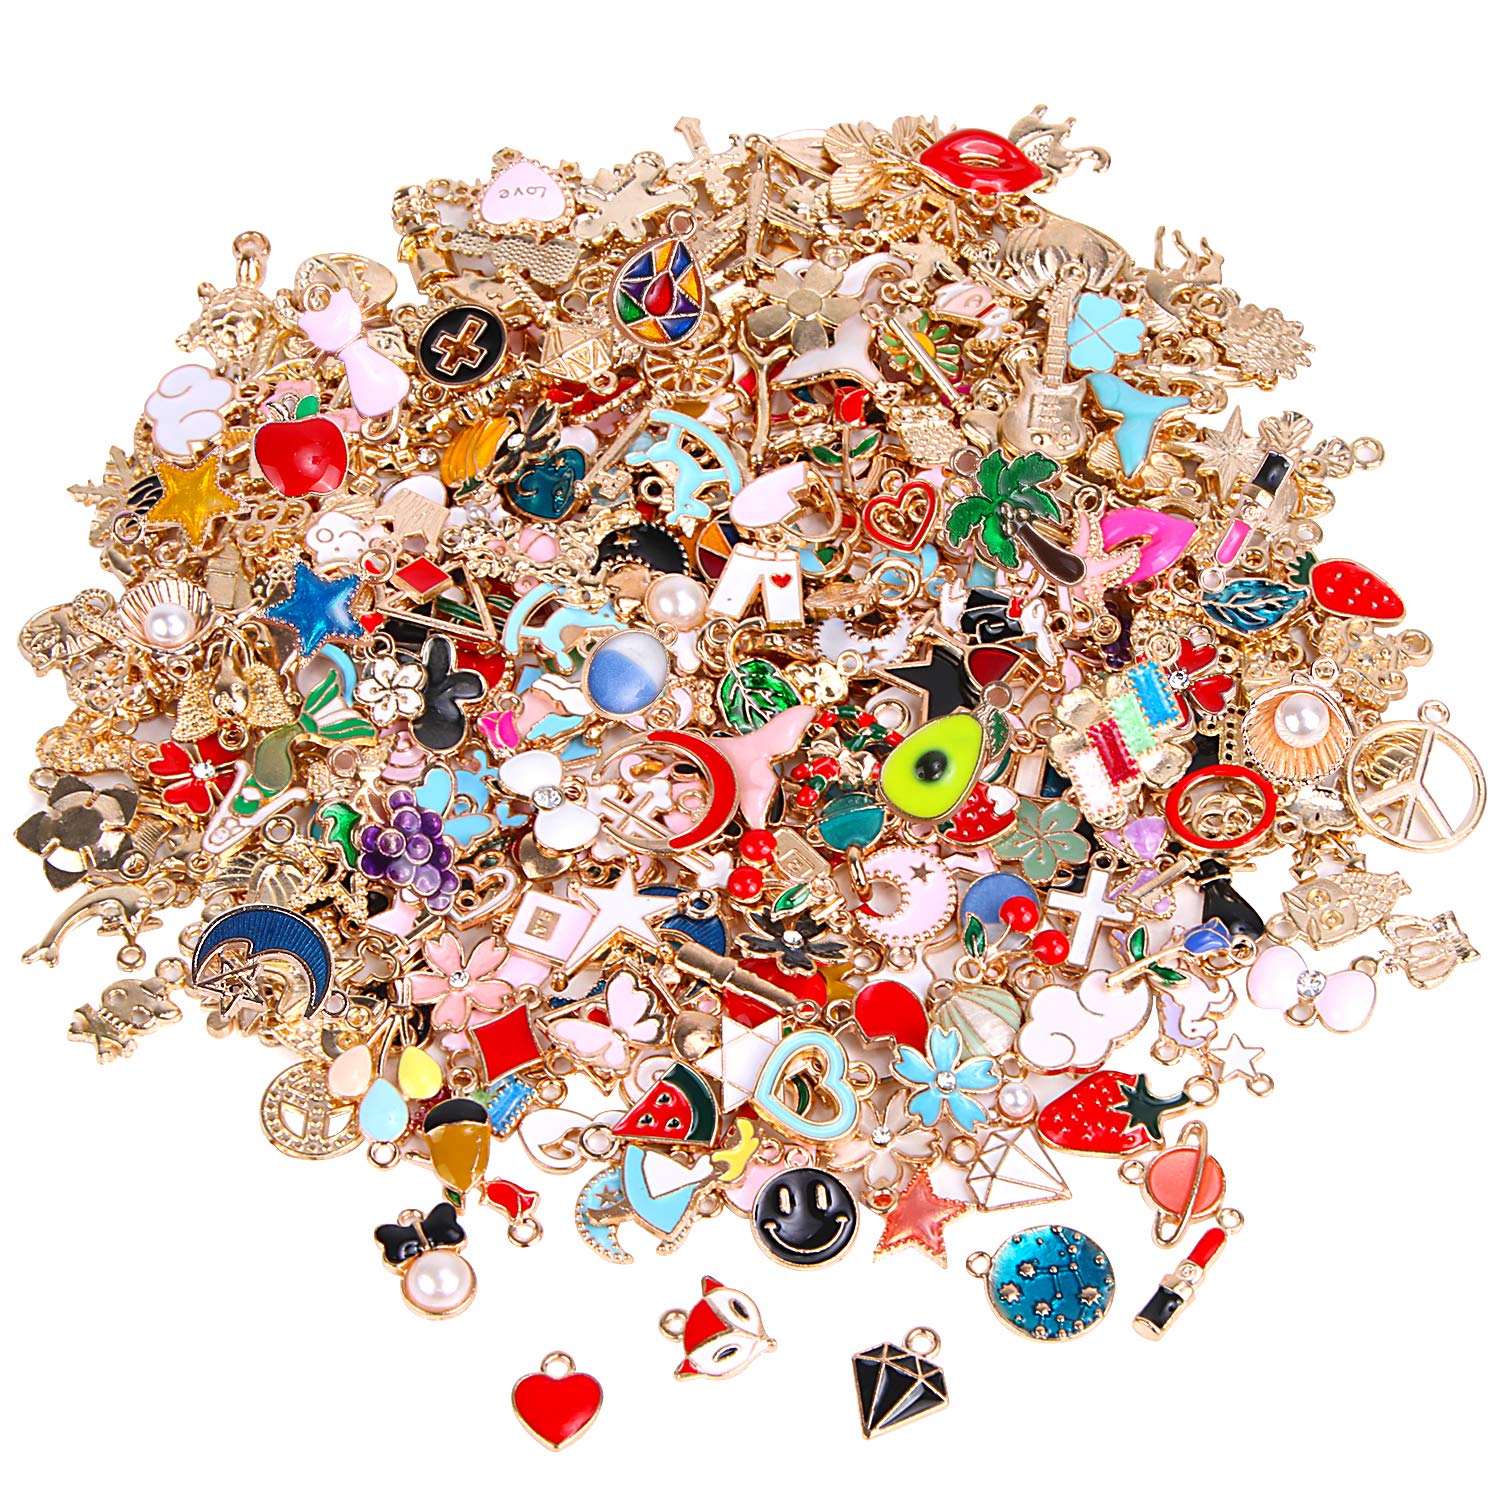 YUEAON 300pcs Bulk Lots Charms for Jewelry Making Supplies Kit Craft Accessories